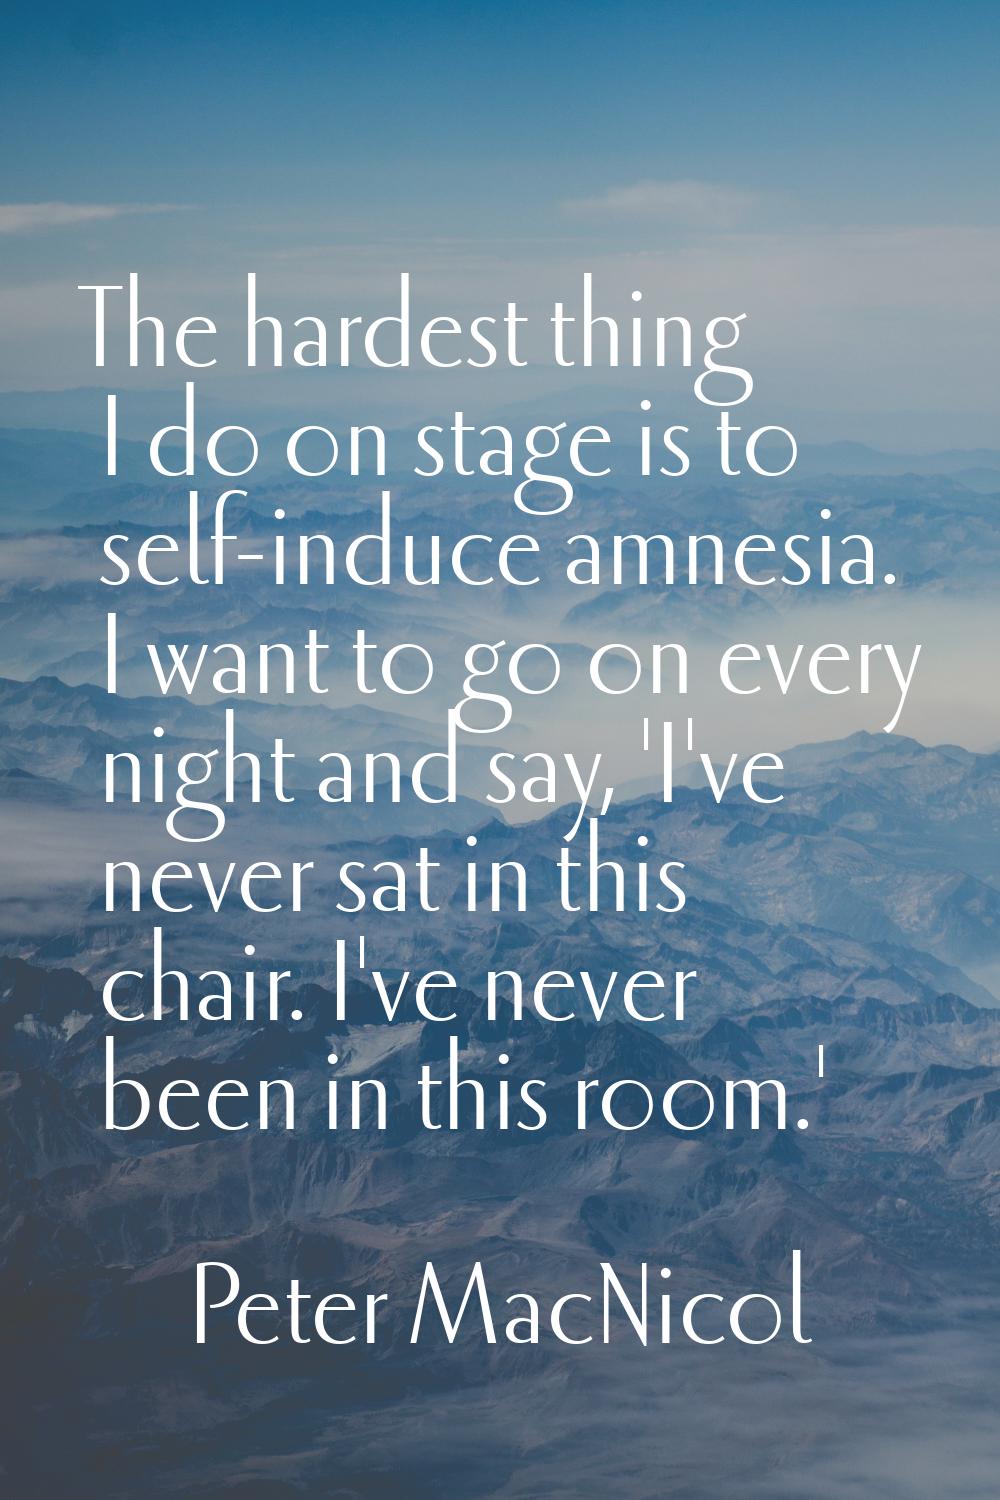 The hardest thing I do on stage is to self-induce amnesia. I want to go on every night and say, 'I'